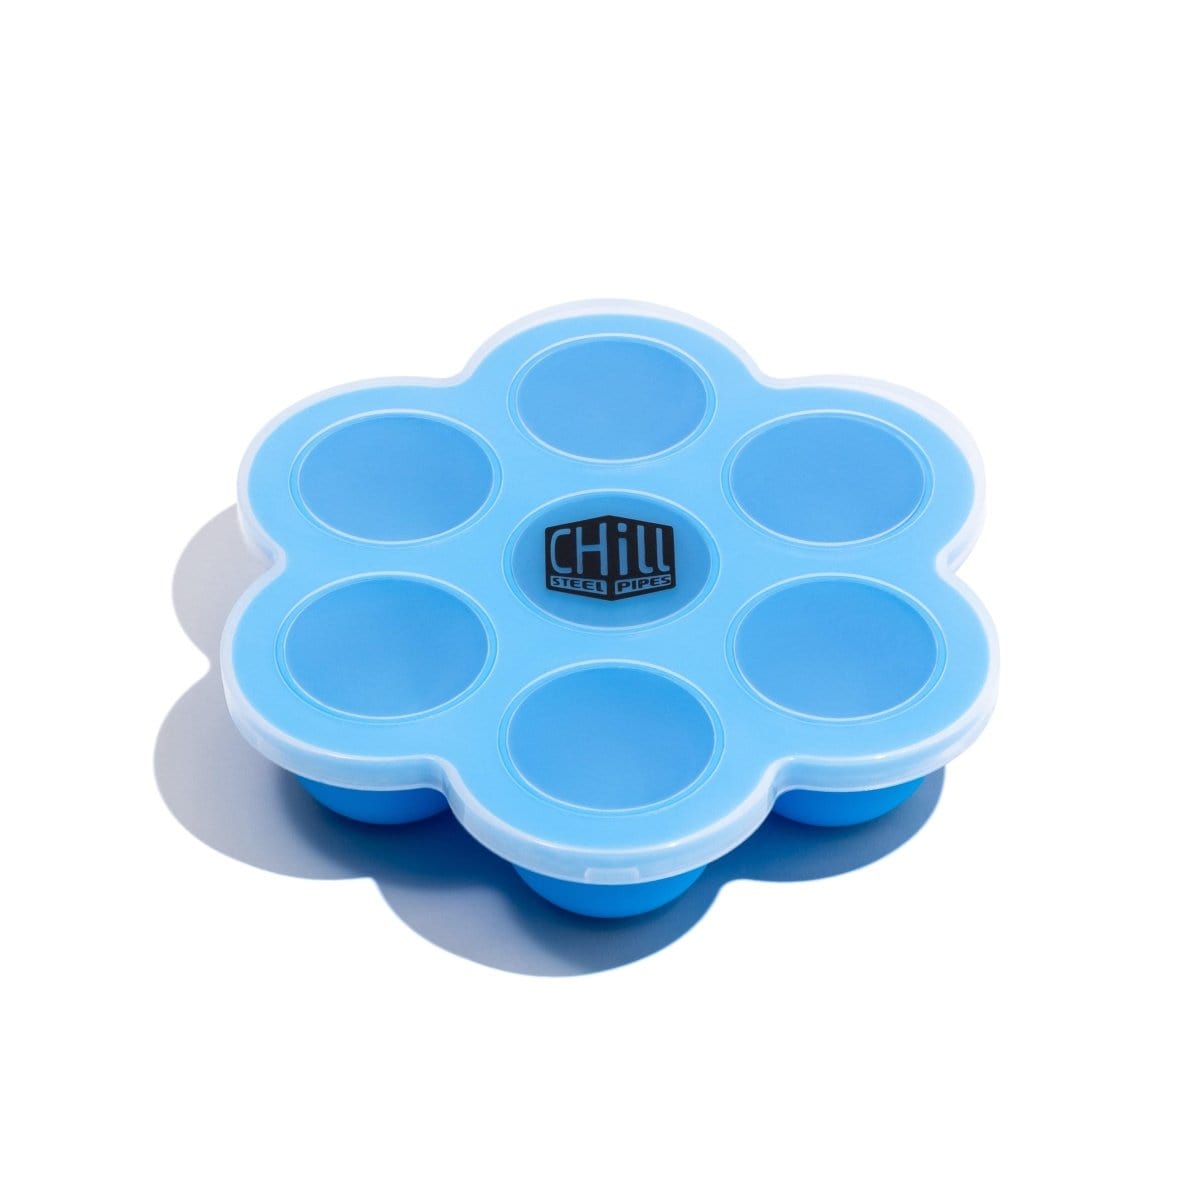 Chill Steel Pipes Ice Cube Tray Chill Extra Large Ice Cube Tray Set